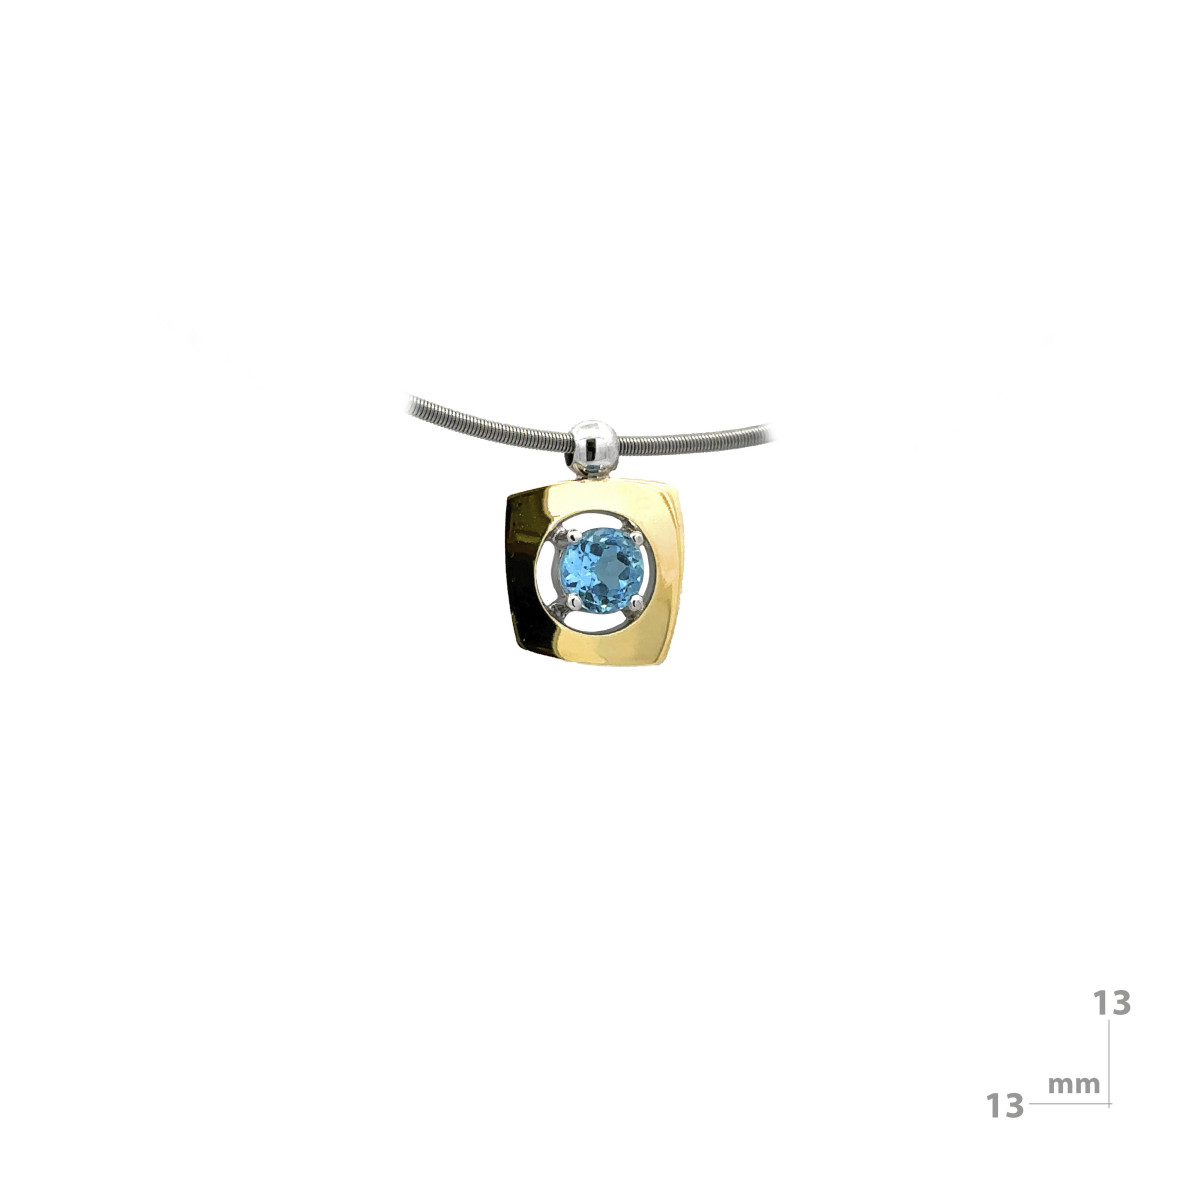 Silver, gold and topaz pendant